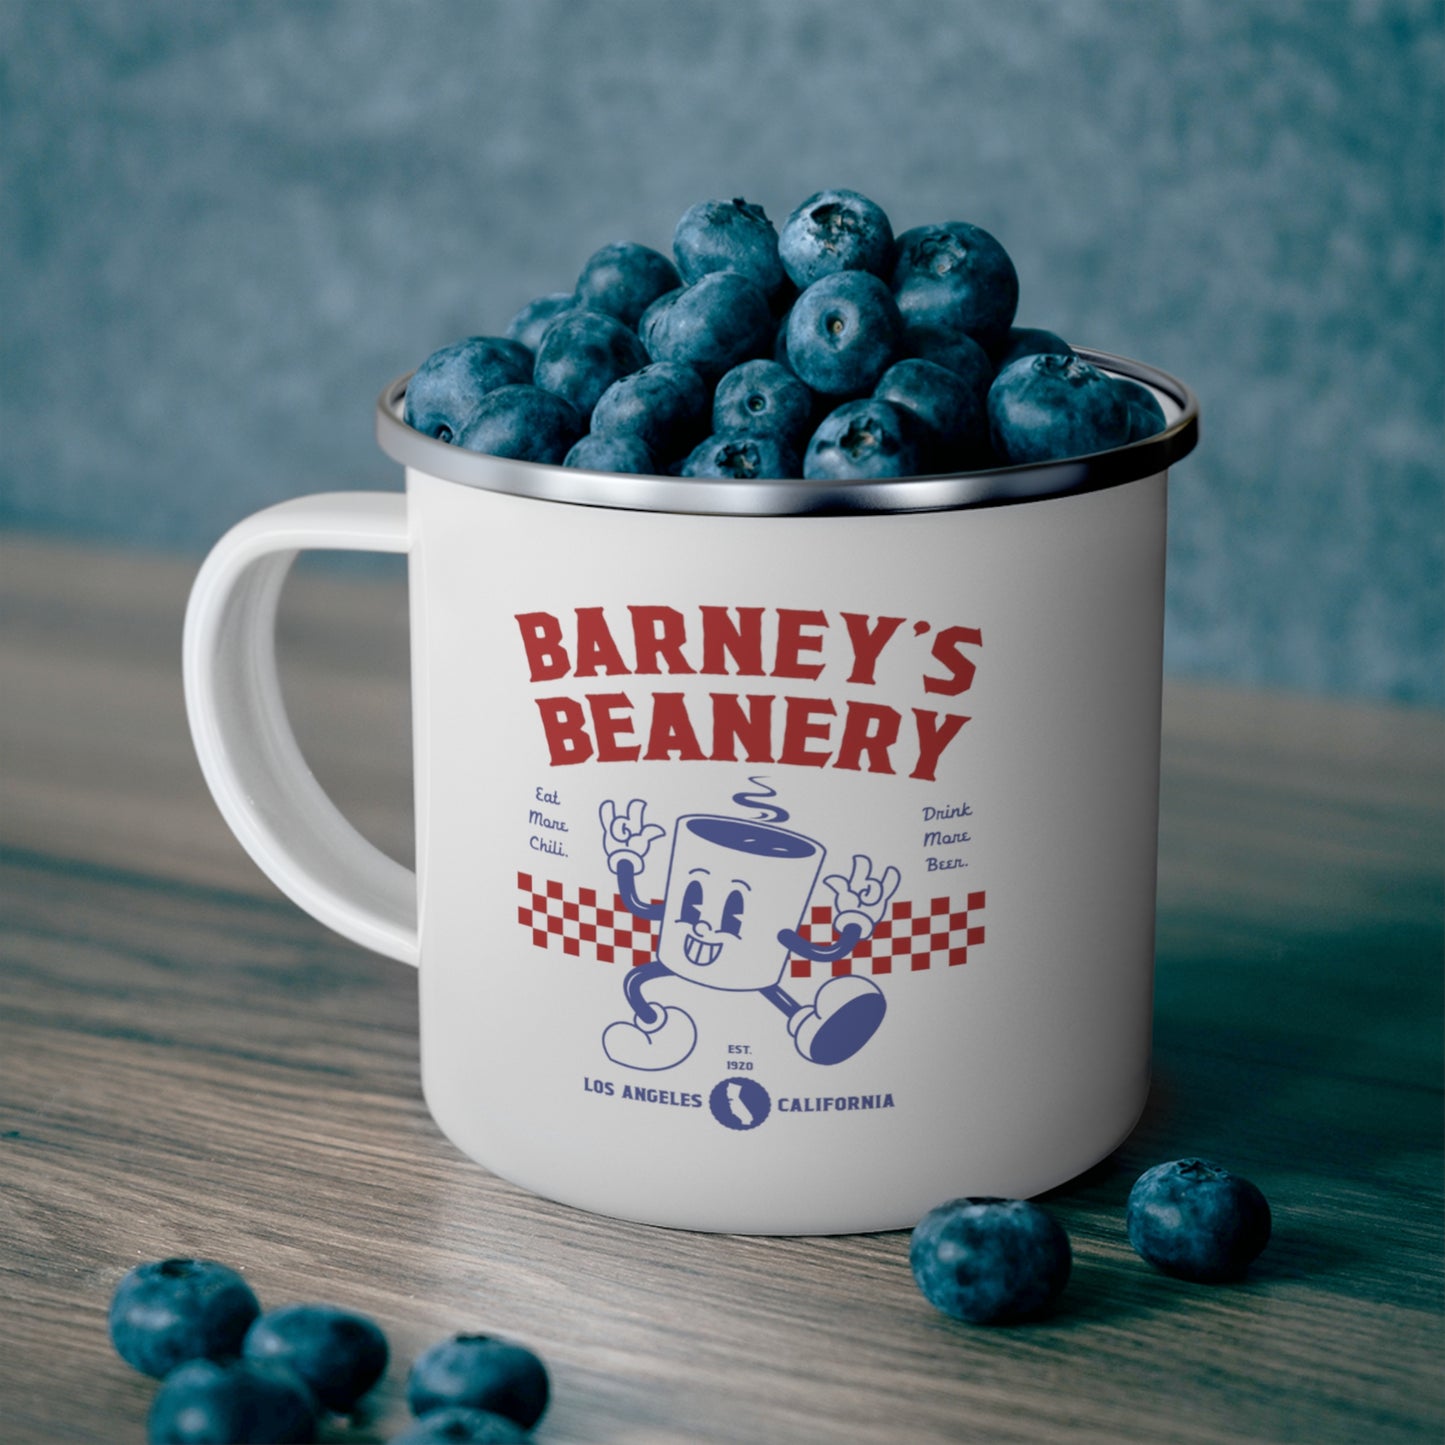 Eat More Chili. Drink More Beer. | BARNEY'S BEANERY - Red & Blue Camping Mug 12oz